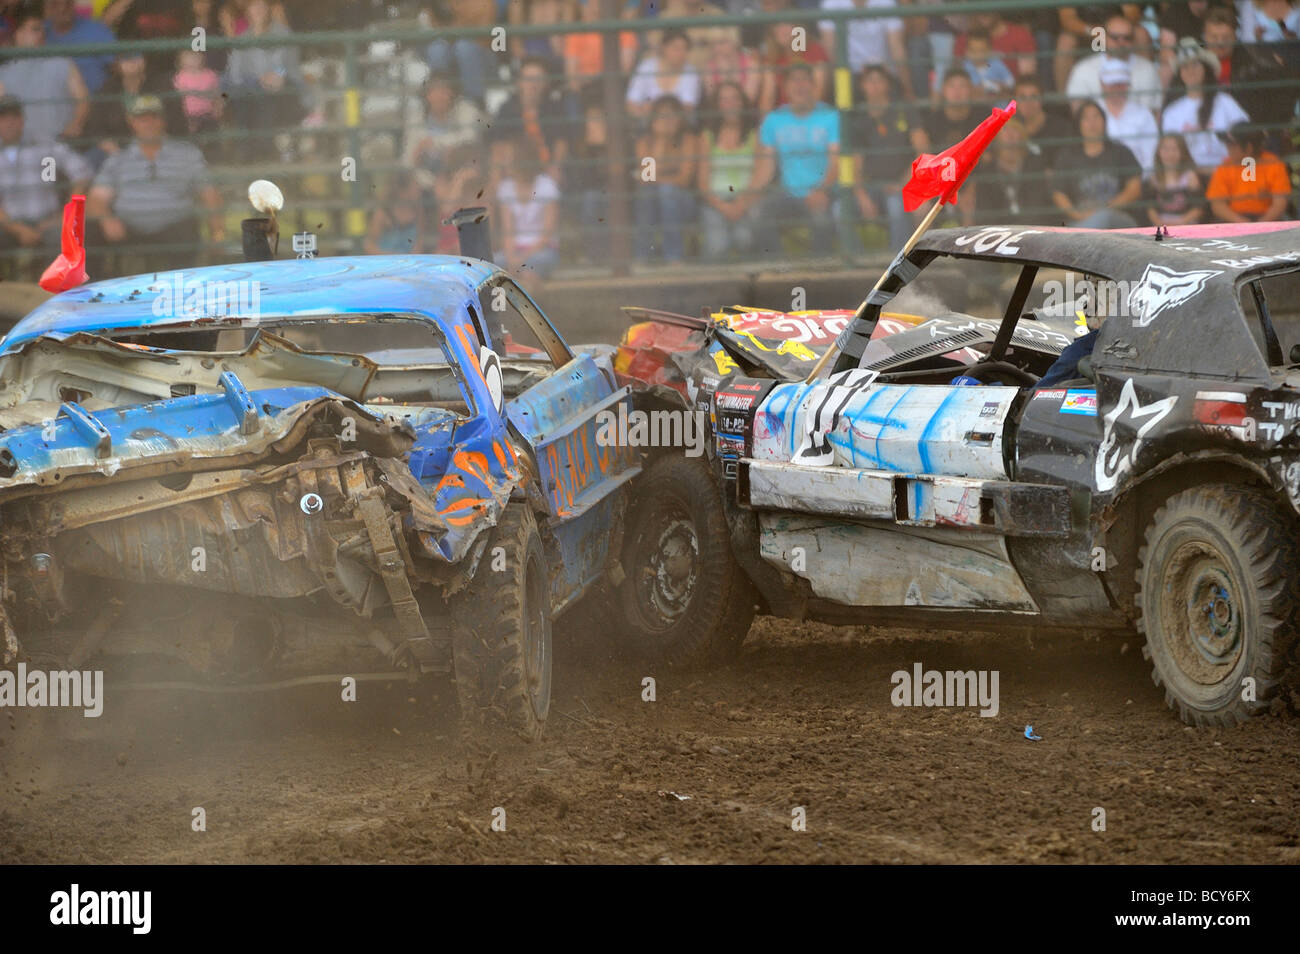 A large crowd of spectators watch as automobiles battle at a demolition derby Stock Photo